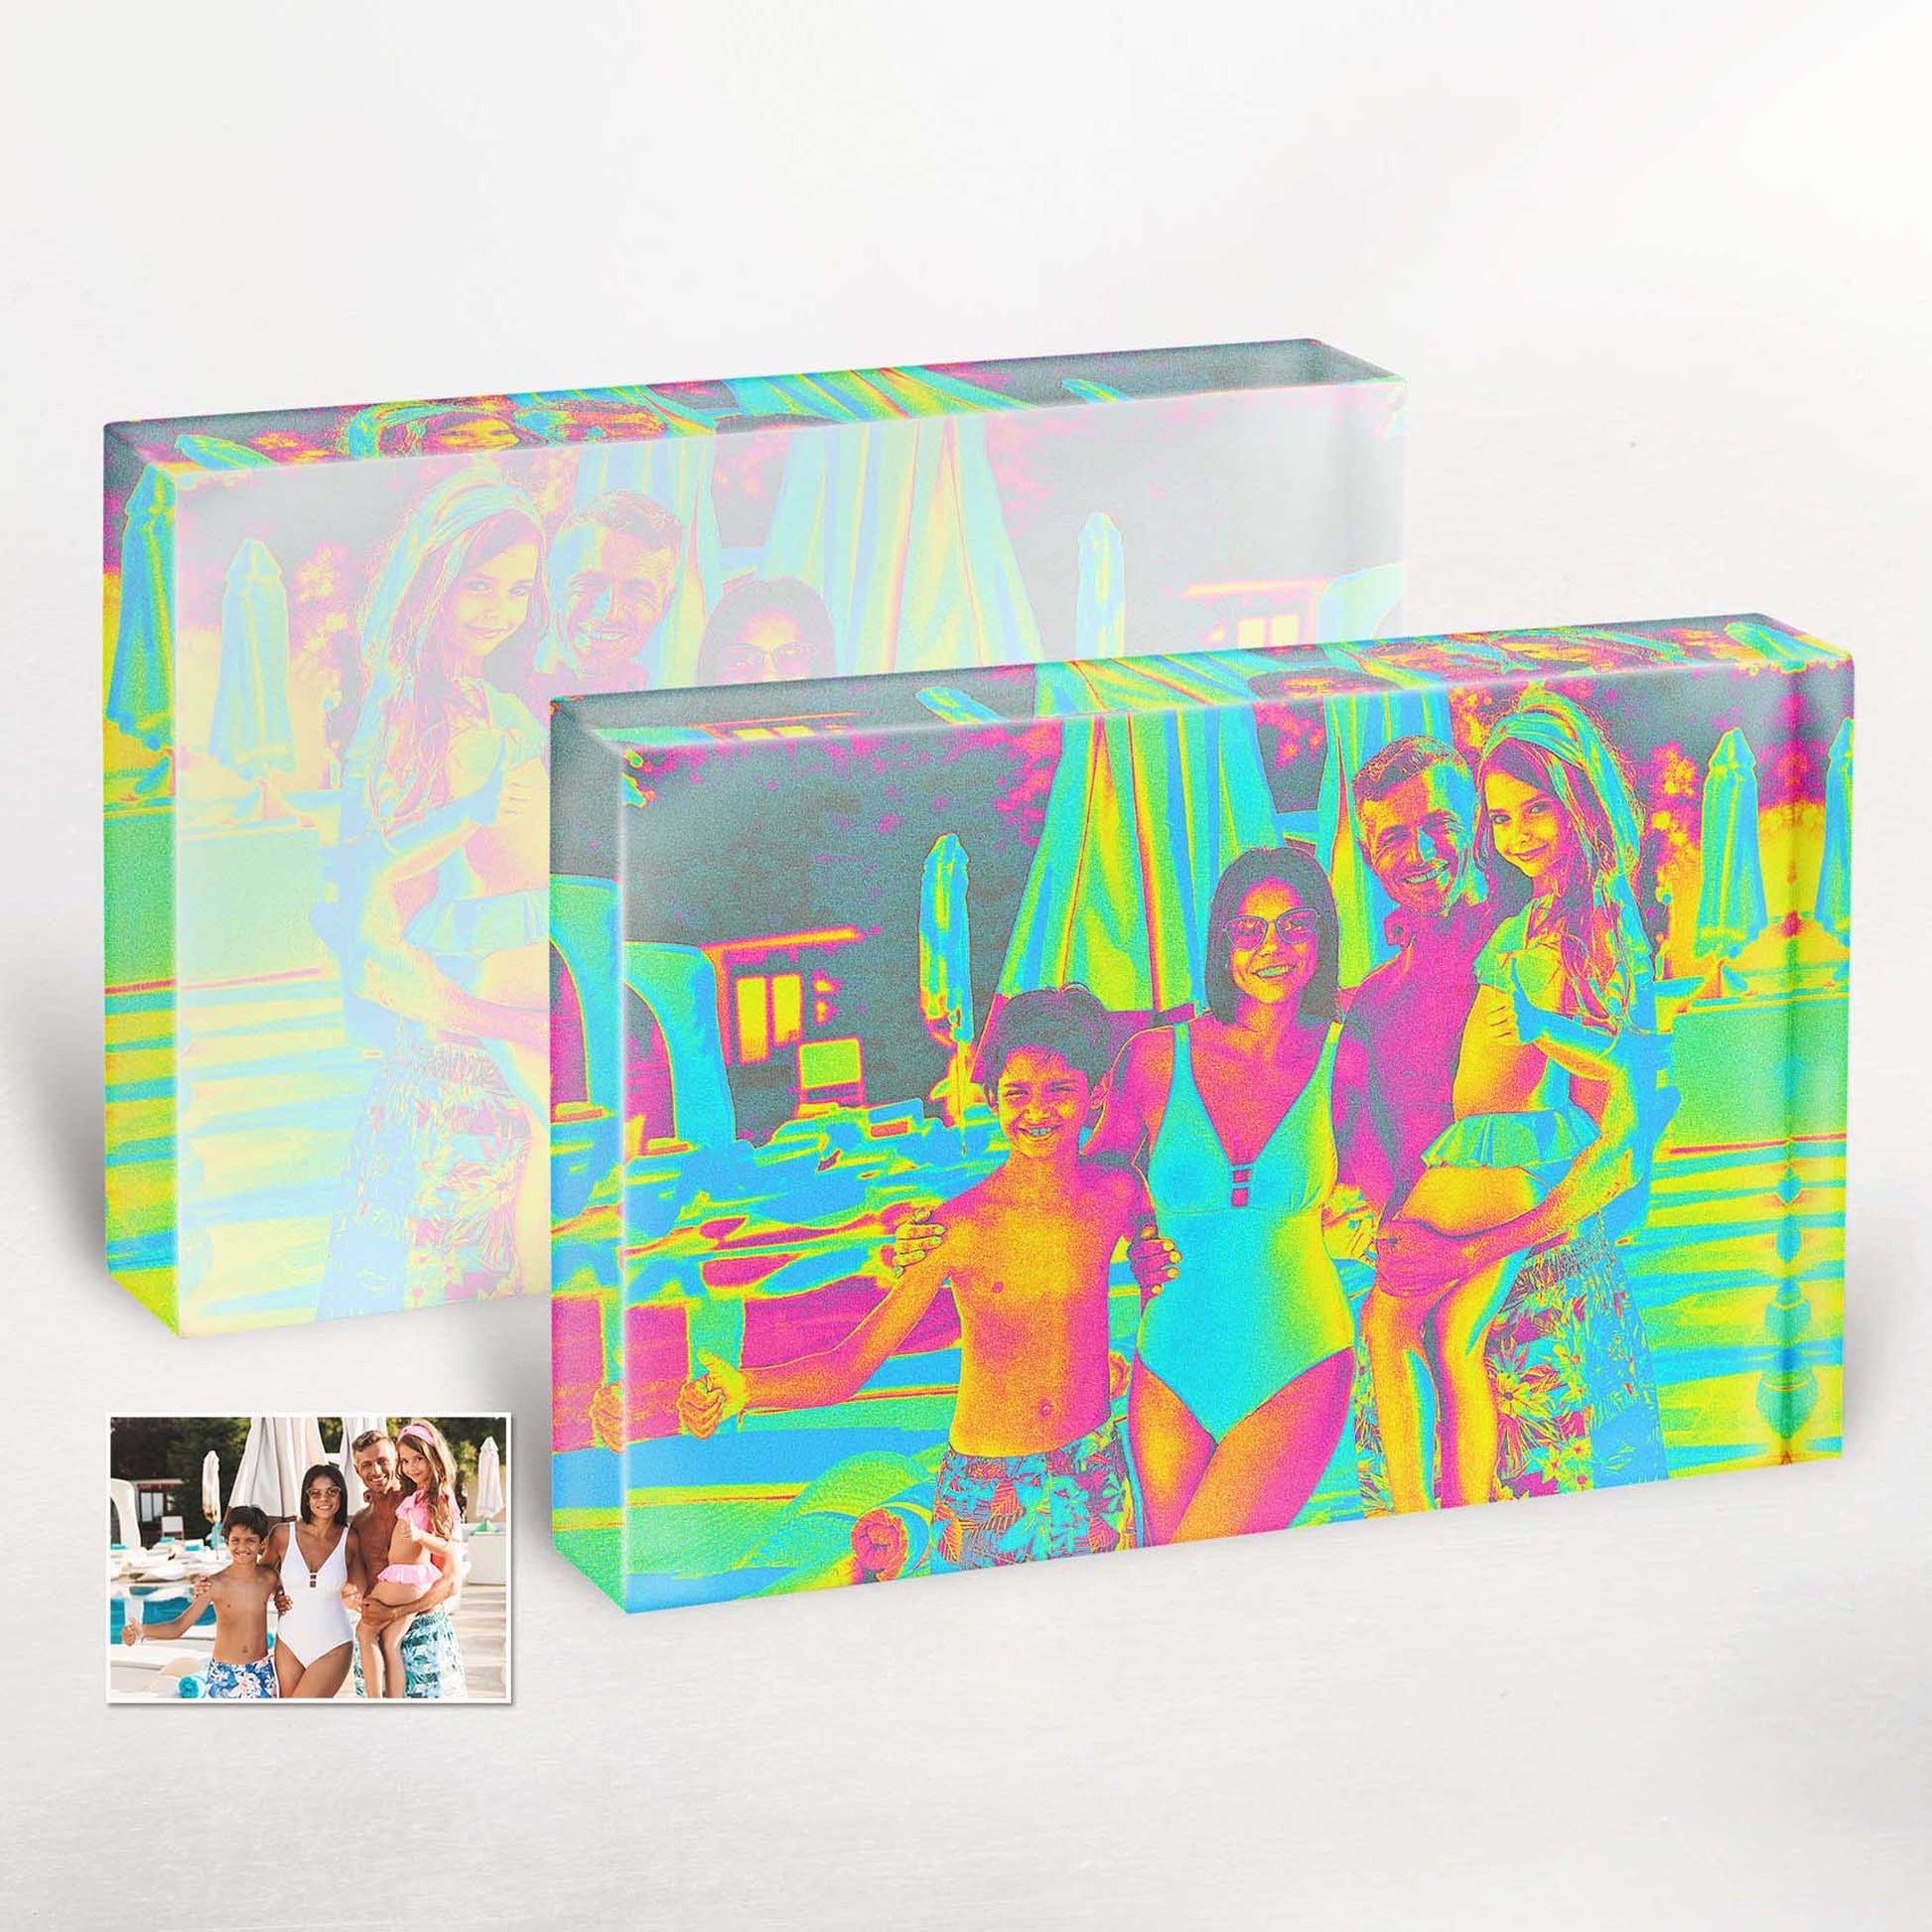 Elevate your home decor with this personalised Acid Trip Effect Acrylic Block Photo. The dynamic and vivid colors blend together in a mesmerizing pattern, creating a unique artwork that adds a touch of vibrancy and personality to your space